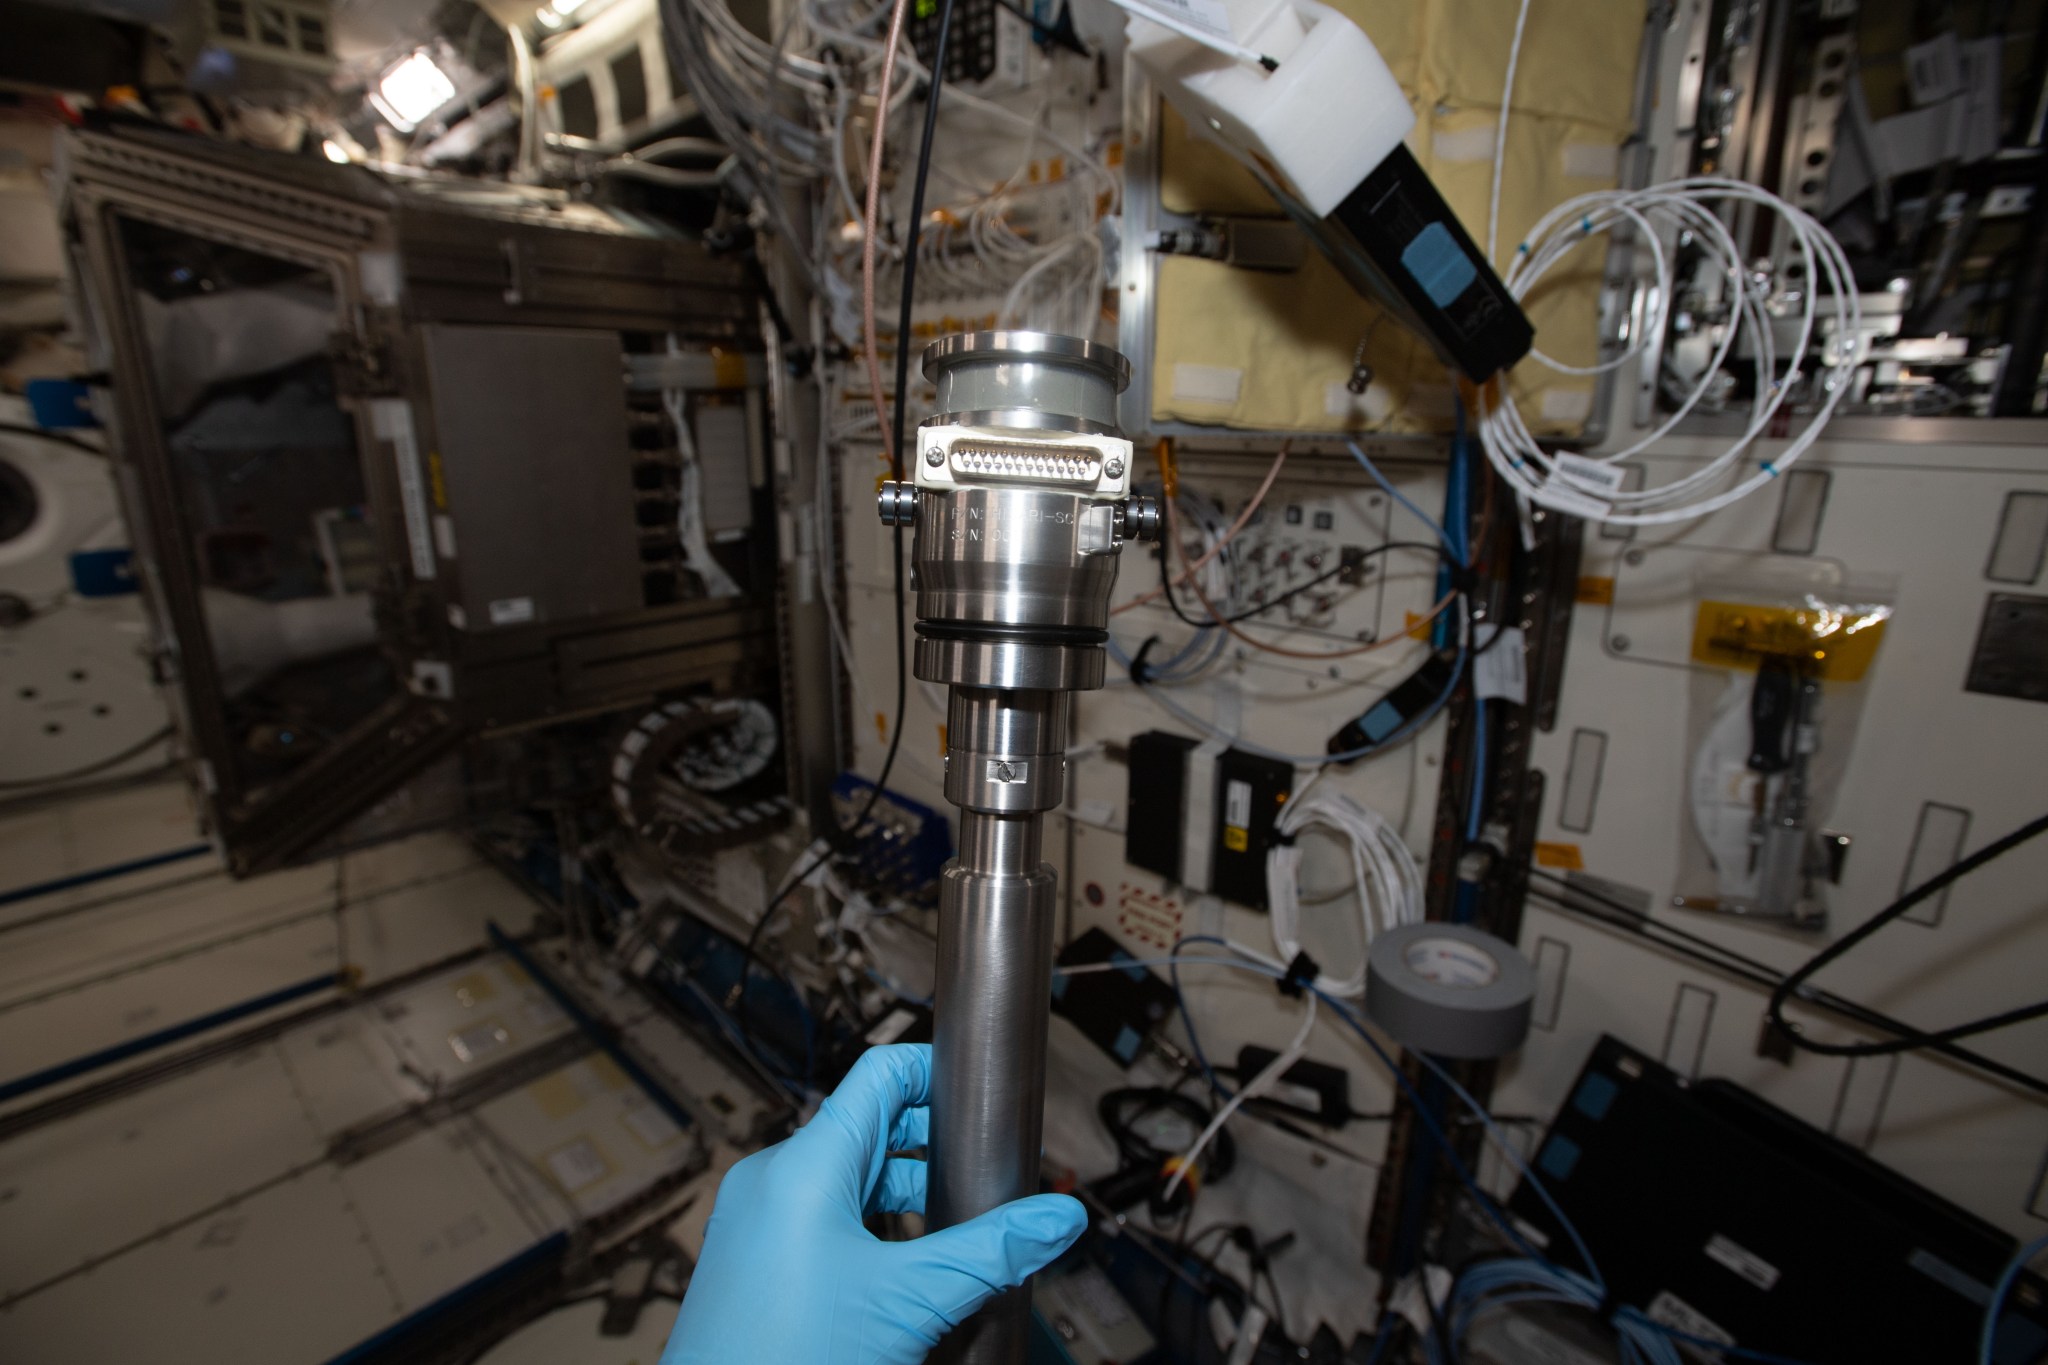 image of experiment hardware